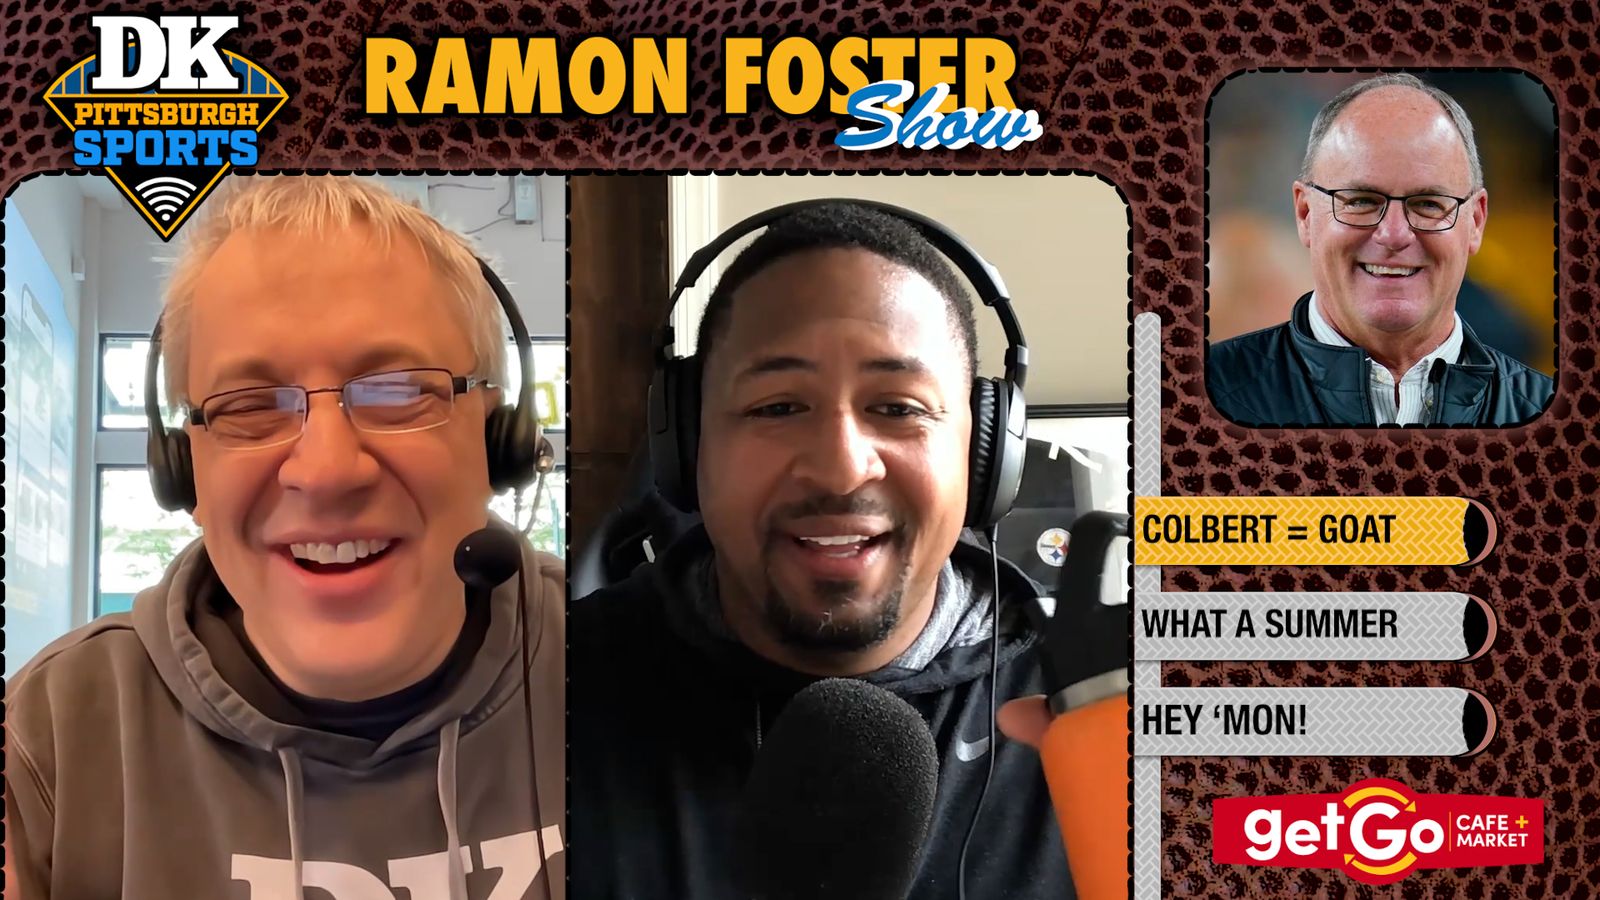 The Ramon Foster Show: Kevin Colbert really is a GOAT